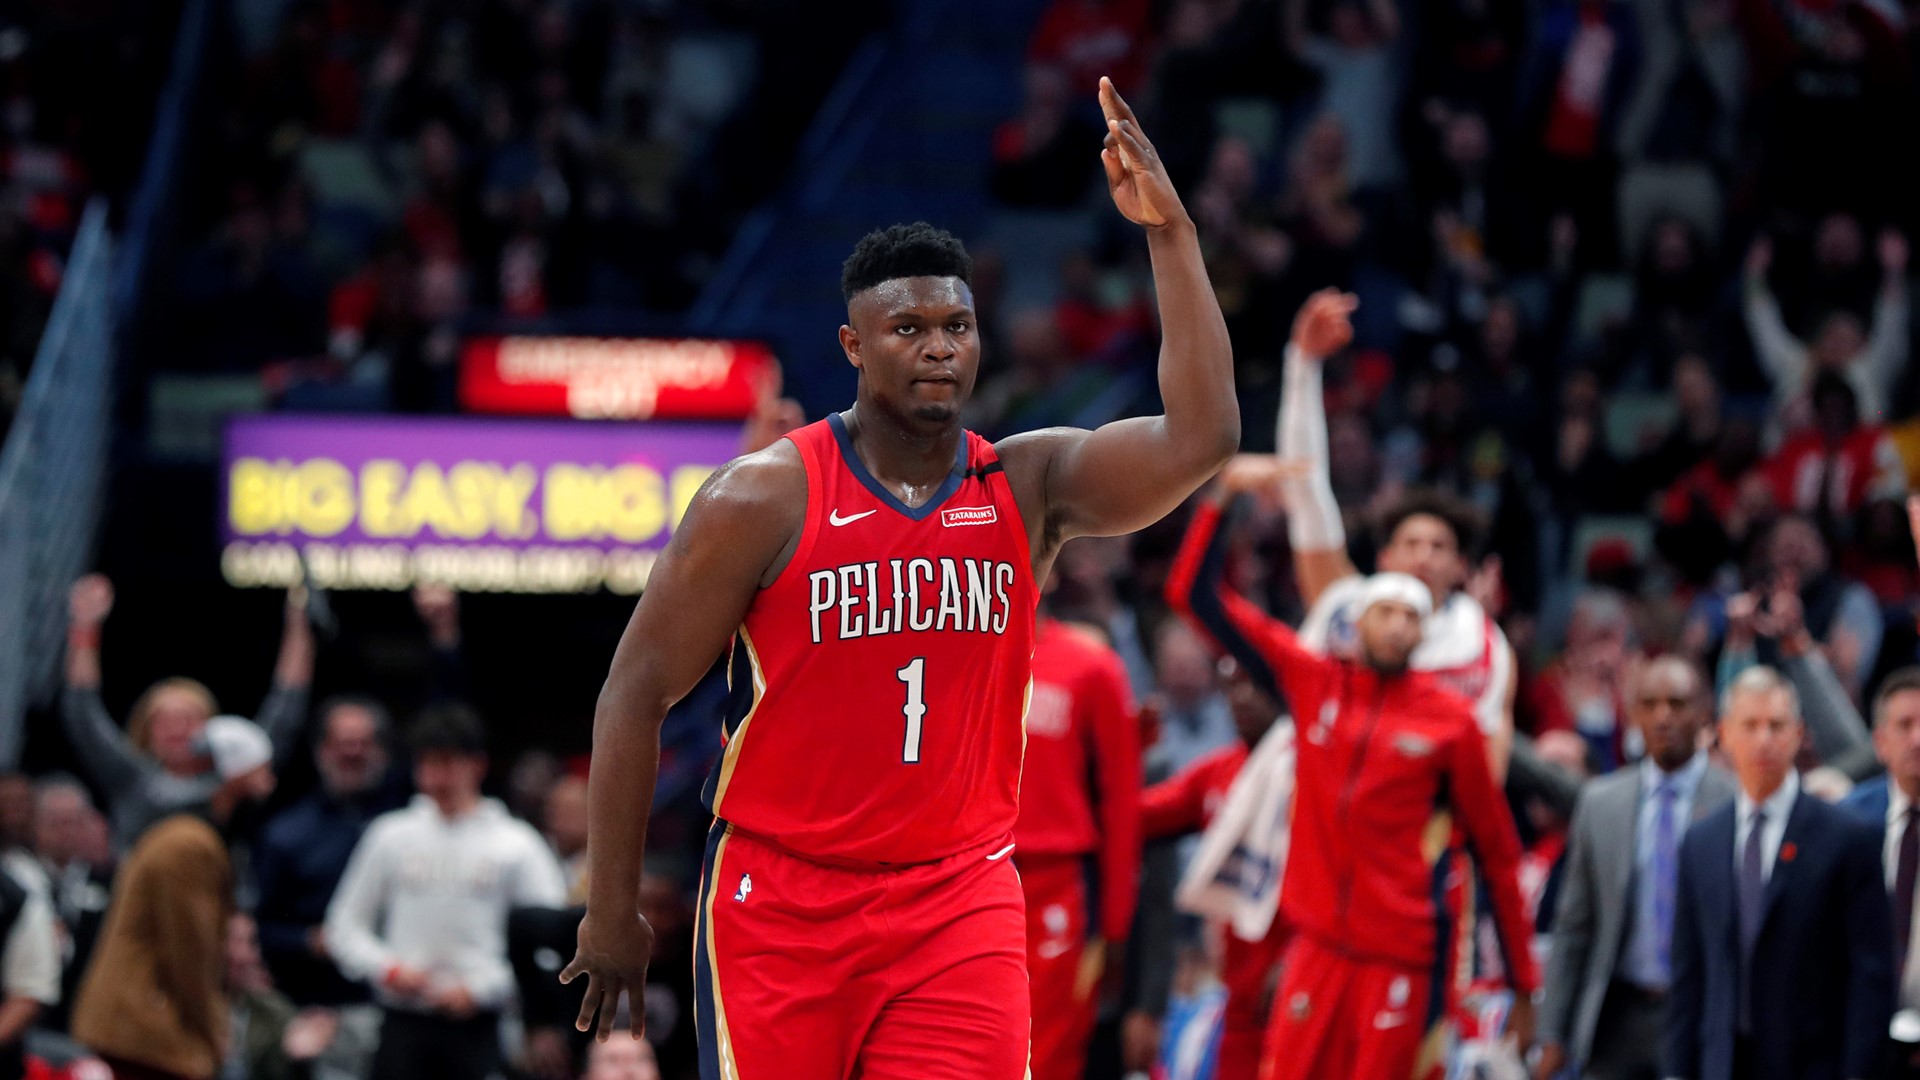 Pelicans release 2021-22 schedule, play 15 nationally televised games